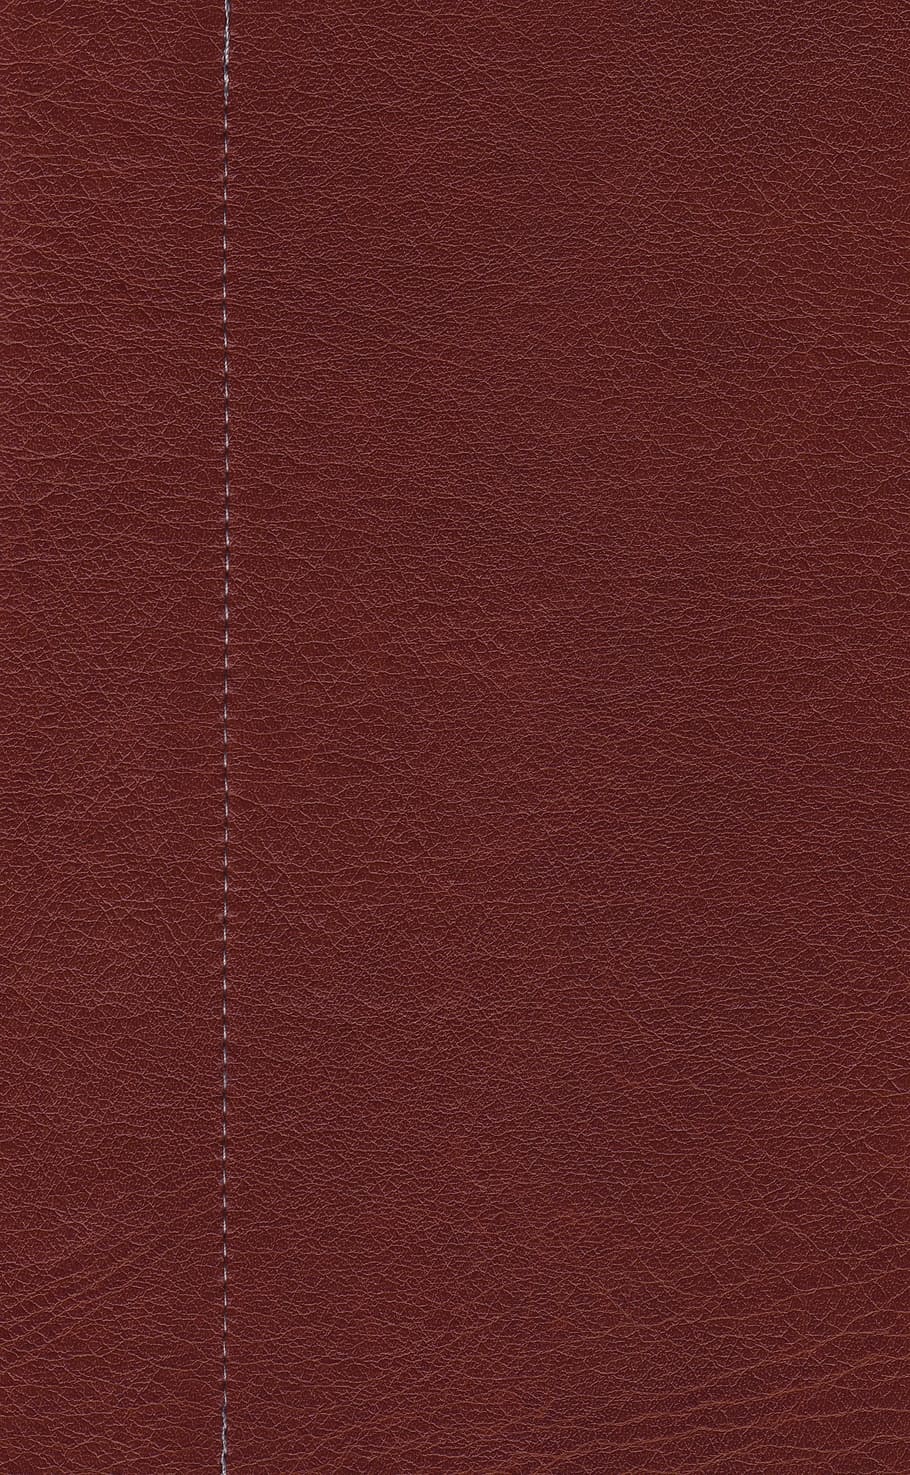 untitled, Leather, Textures, Background, Fabric, raw, decor, material, pattern, art